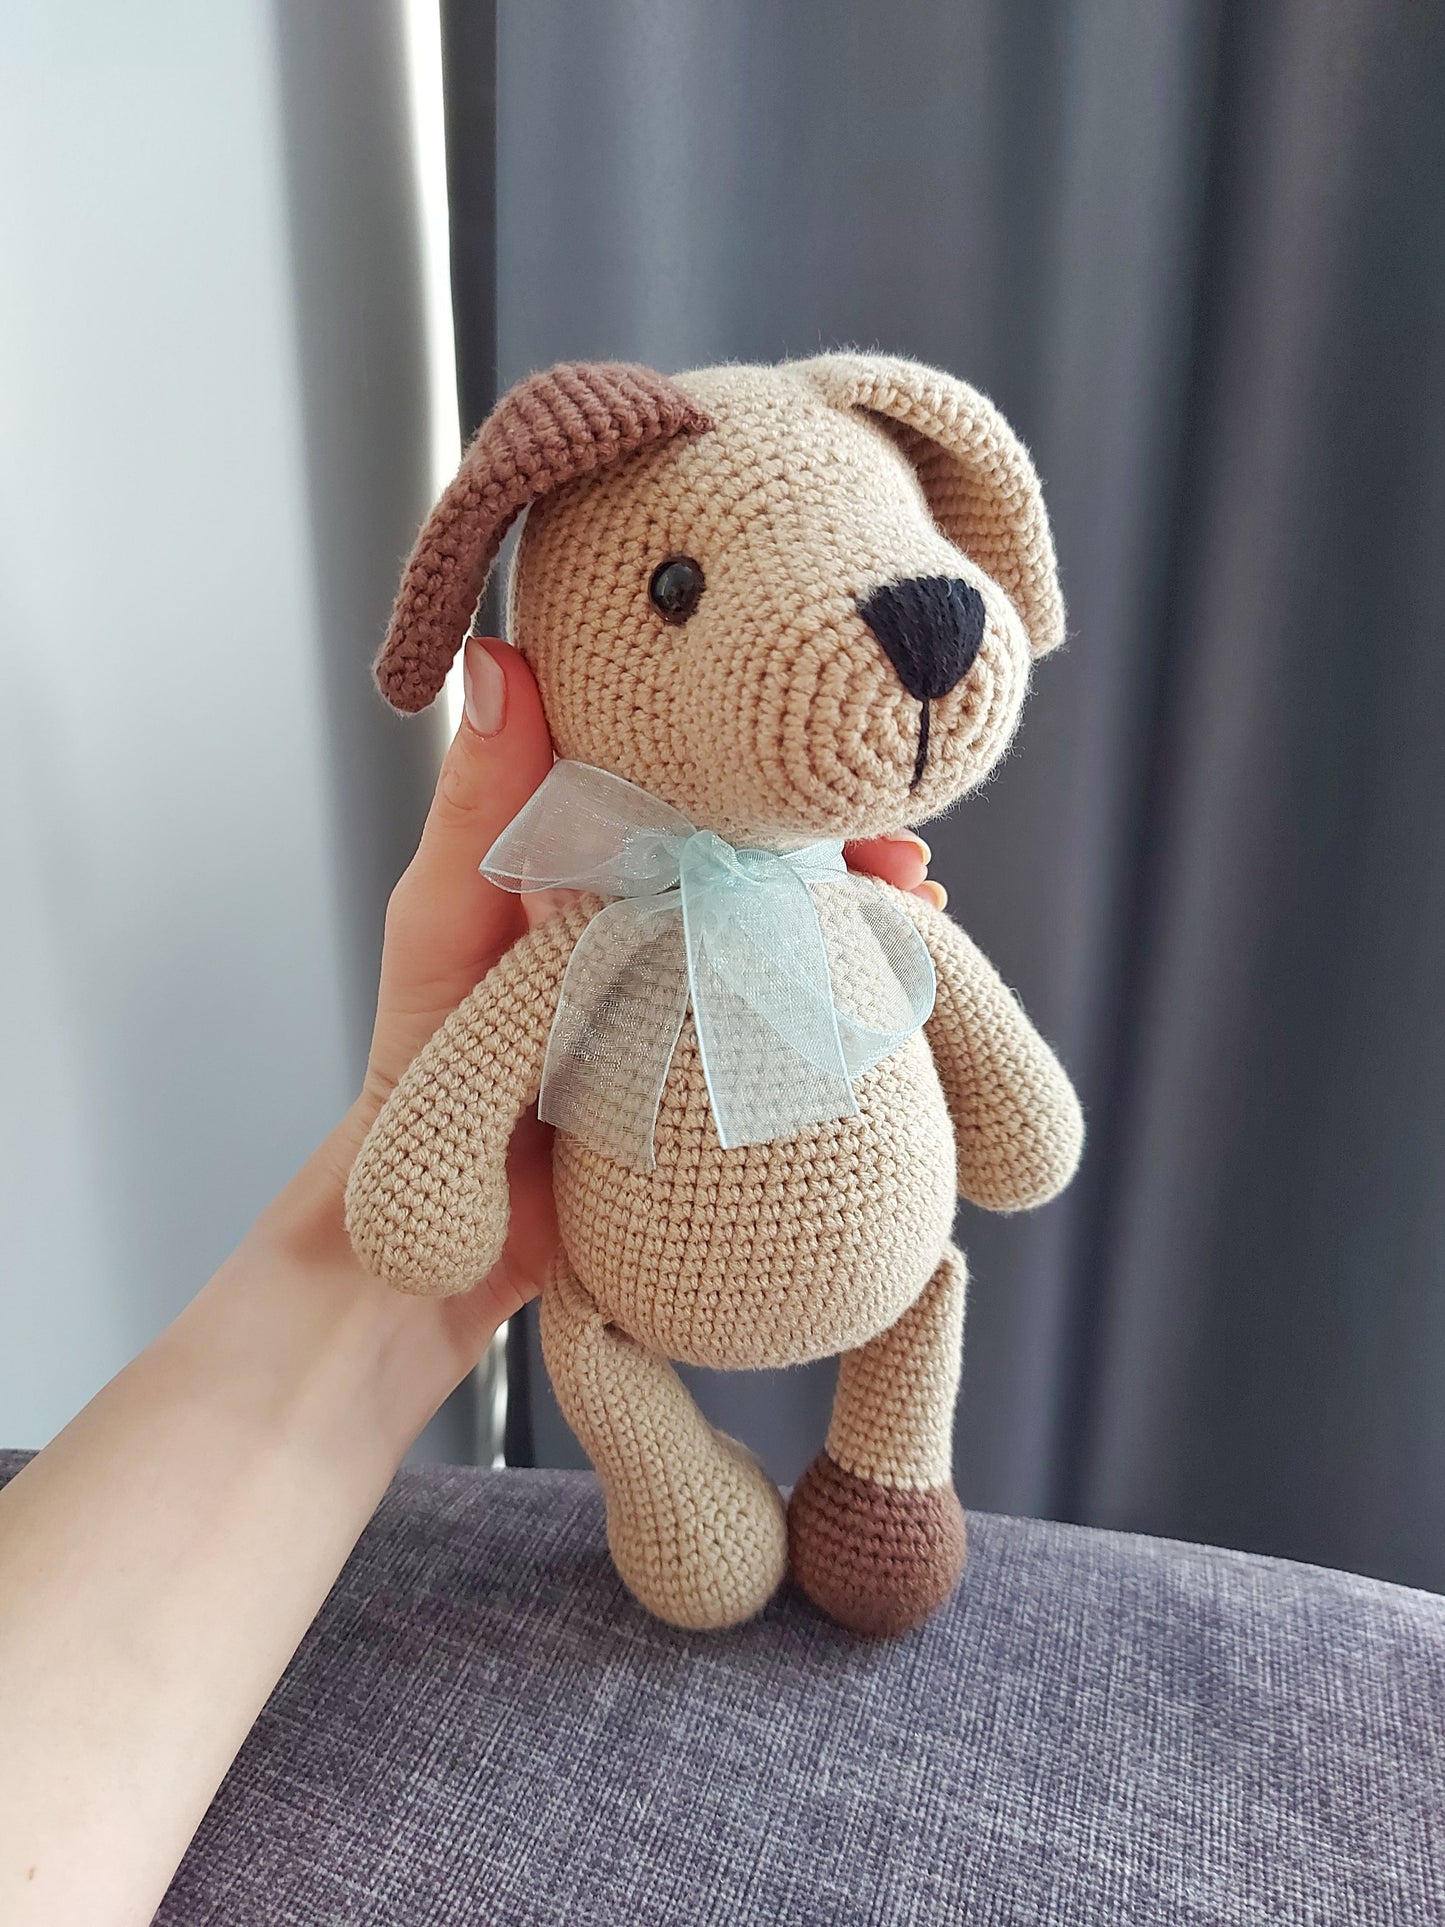 crochet puppy toy pattern, handmade dog pattern, amigurumi puppy doll, soft stuffed doggy, gift for puppy lover, gift for children girl